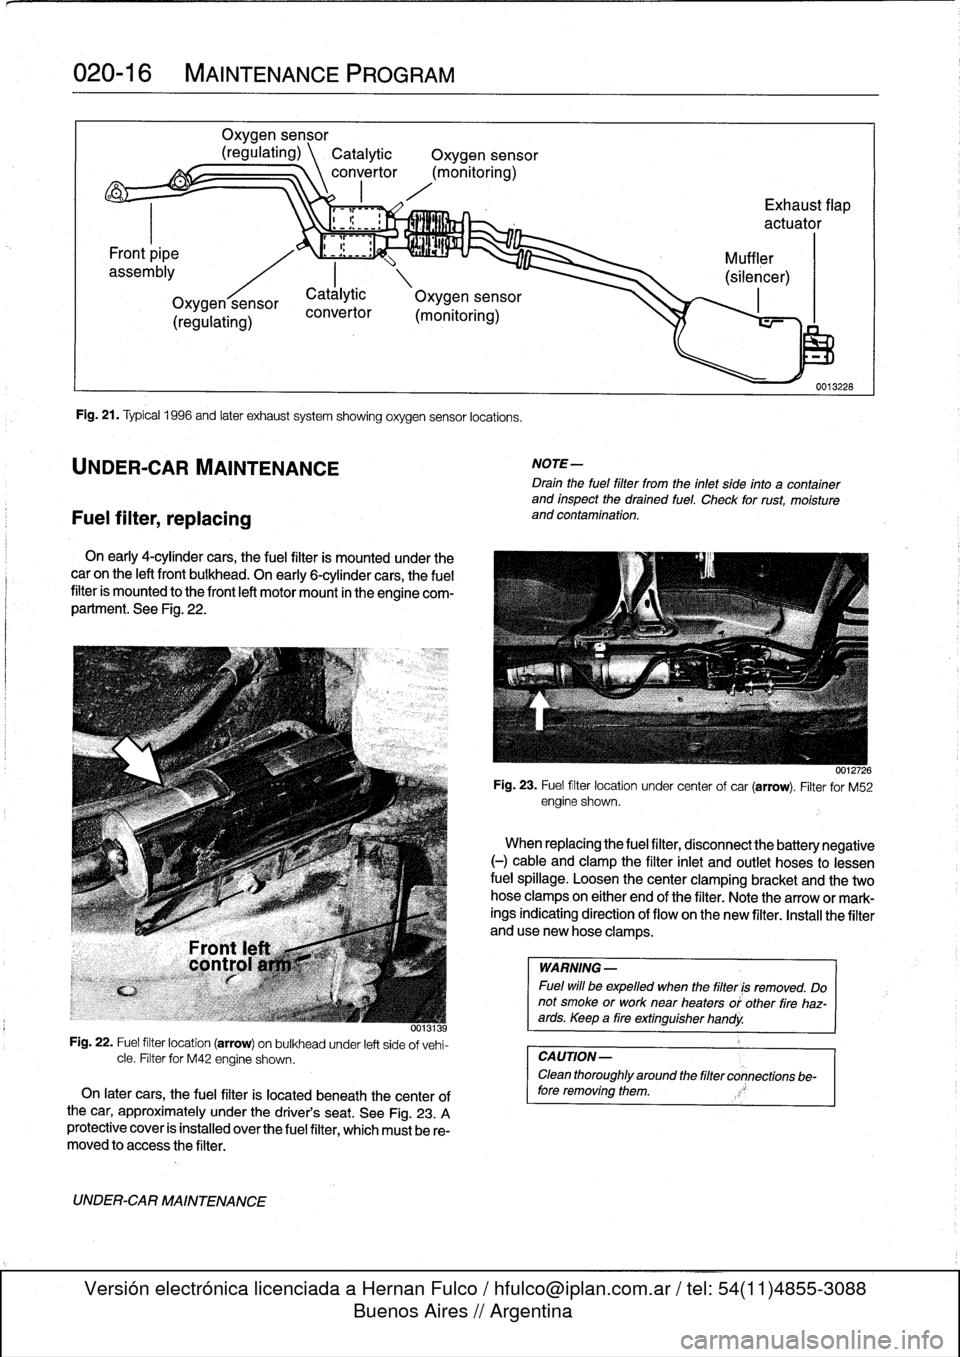 BMW M3 1998 E36 Workshop Manual 
020-
1
6

	

MAINTENANCE
PROGRAM

Fuel
filter,
replacing

Oxygen
sensor

(regulating)
\
Catalytic

	

Oxygen
sensor
convertor
(monitoring)

Fig
.
21
.
Typical
1996
and
later
exhaust
system
showing
ox